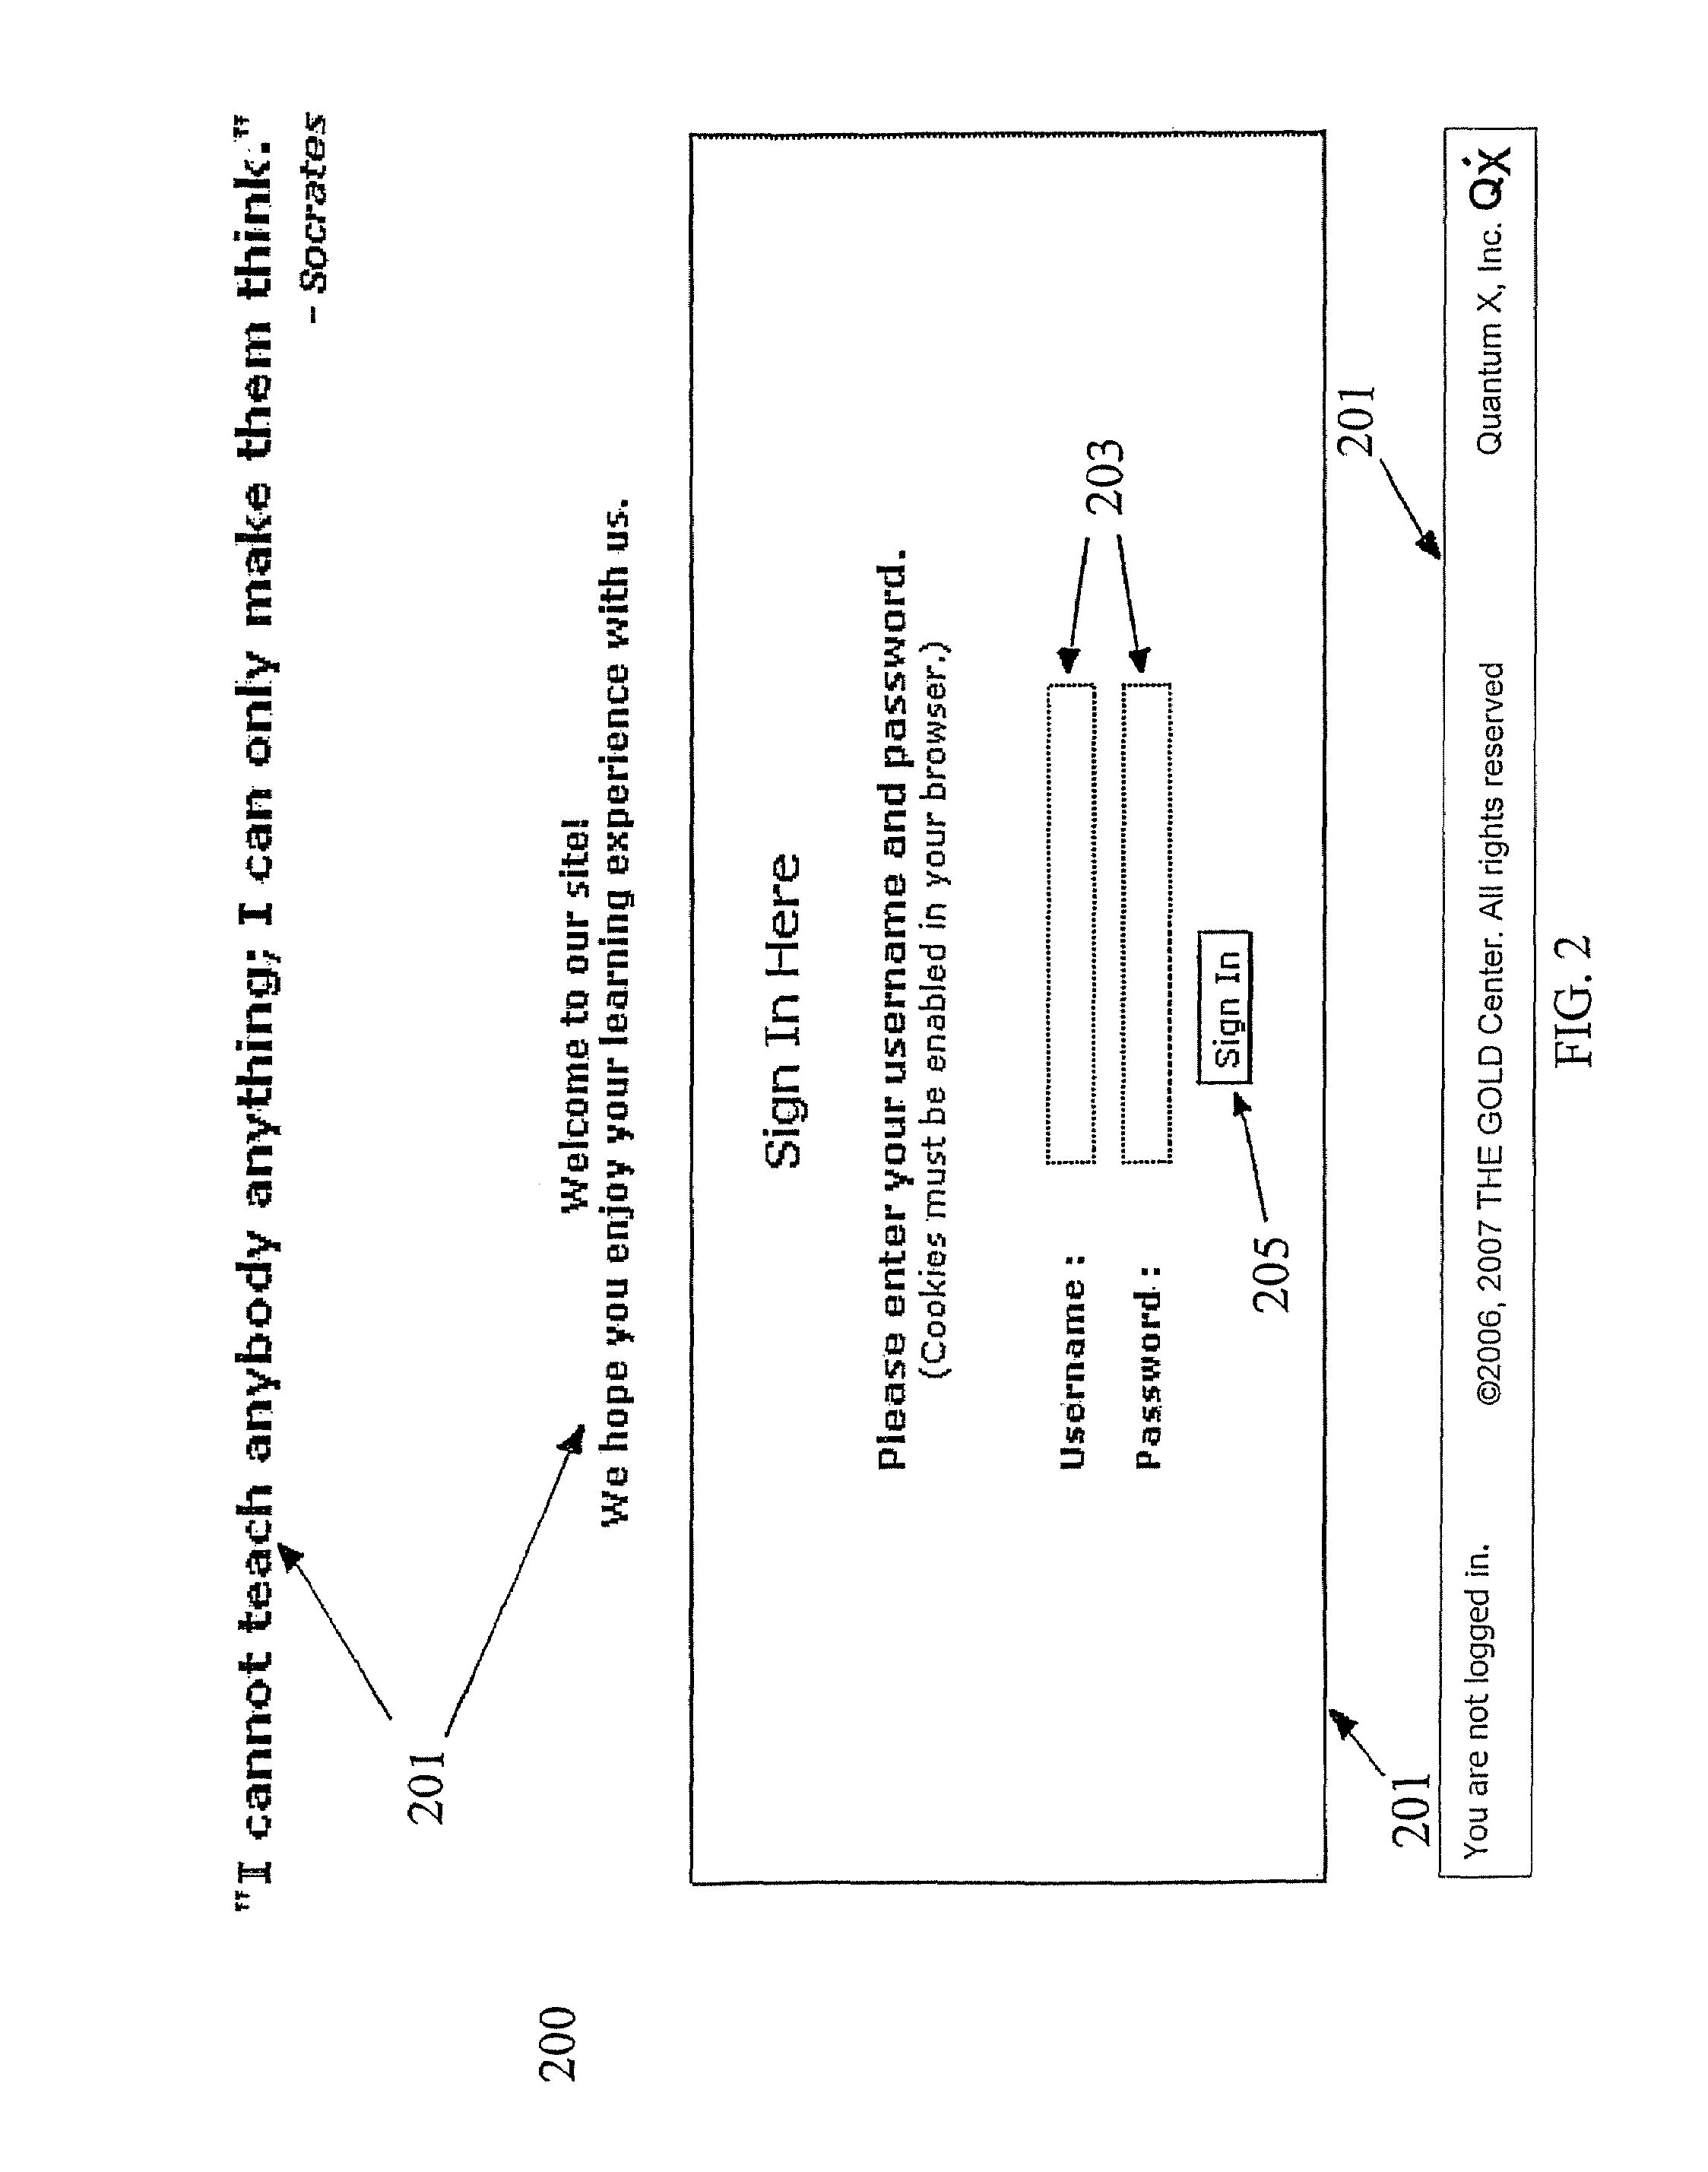 System and Method for Providing Online Education